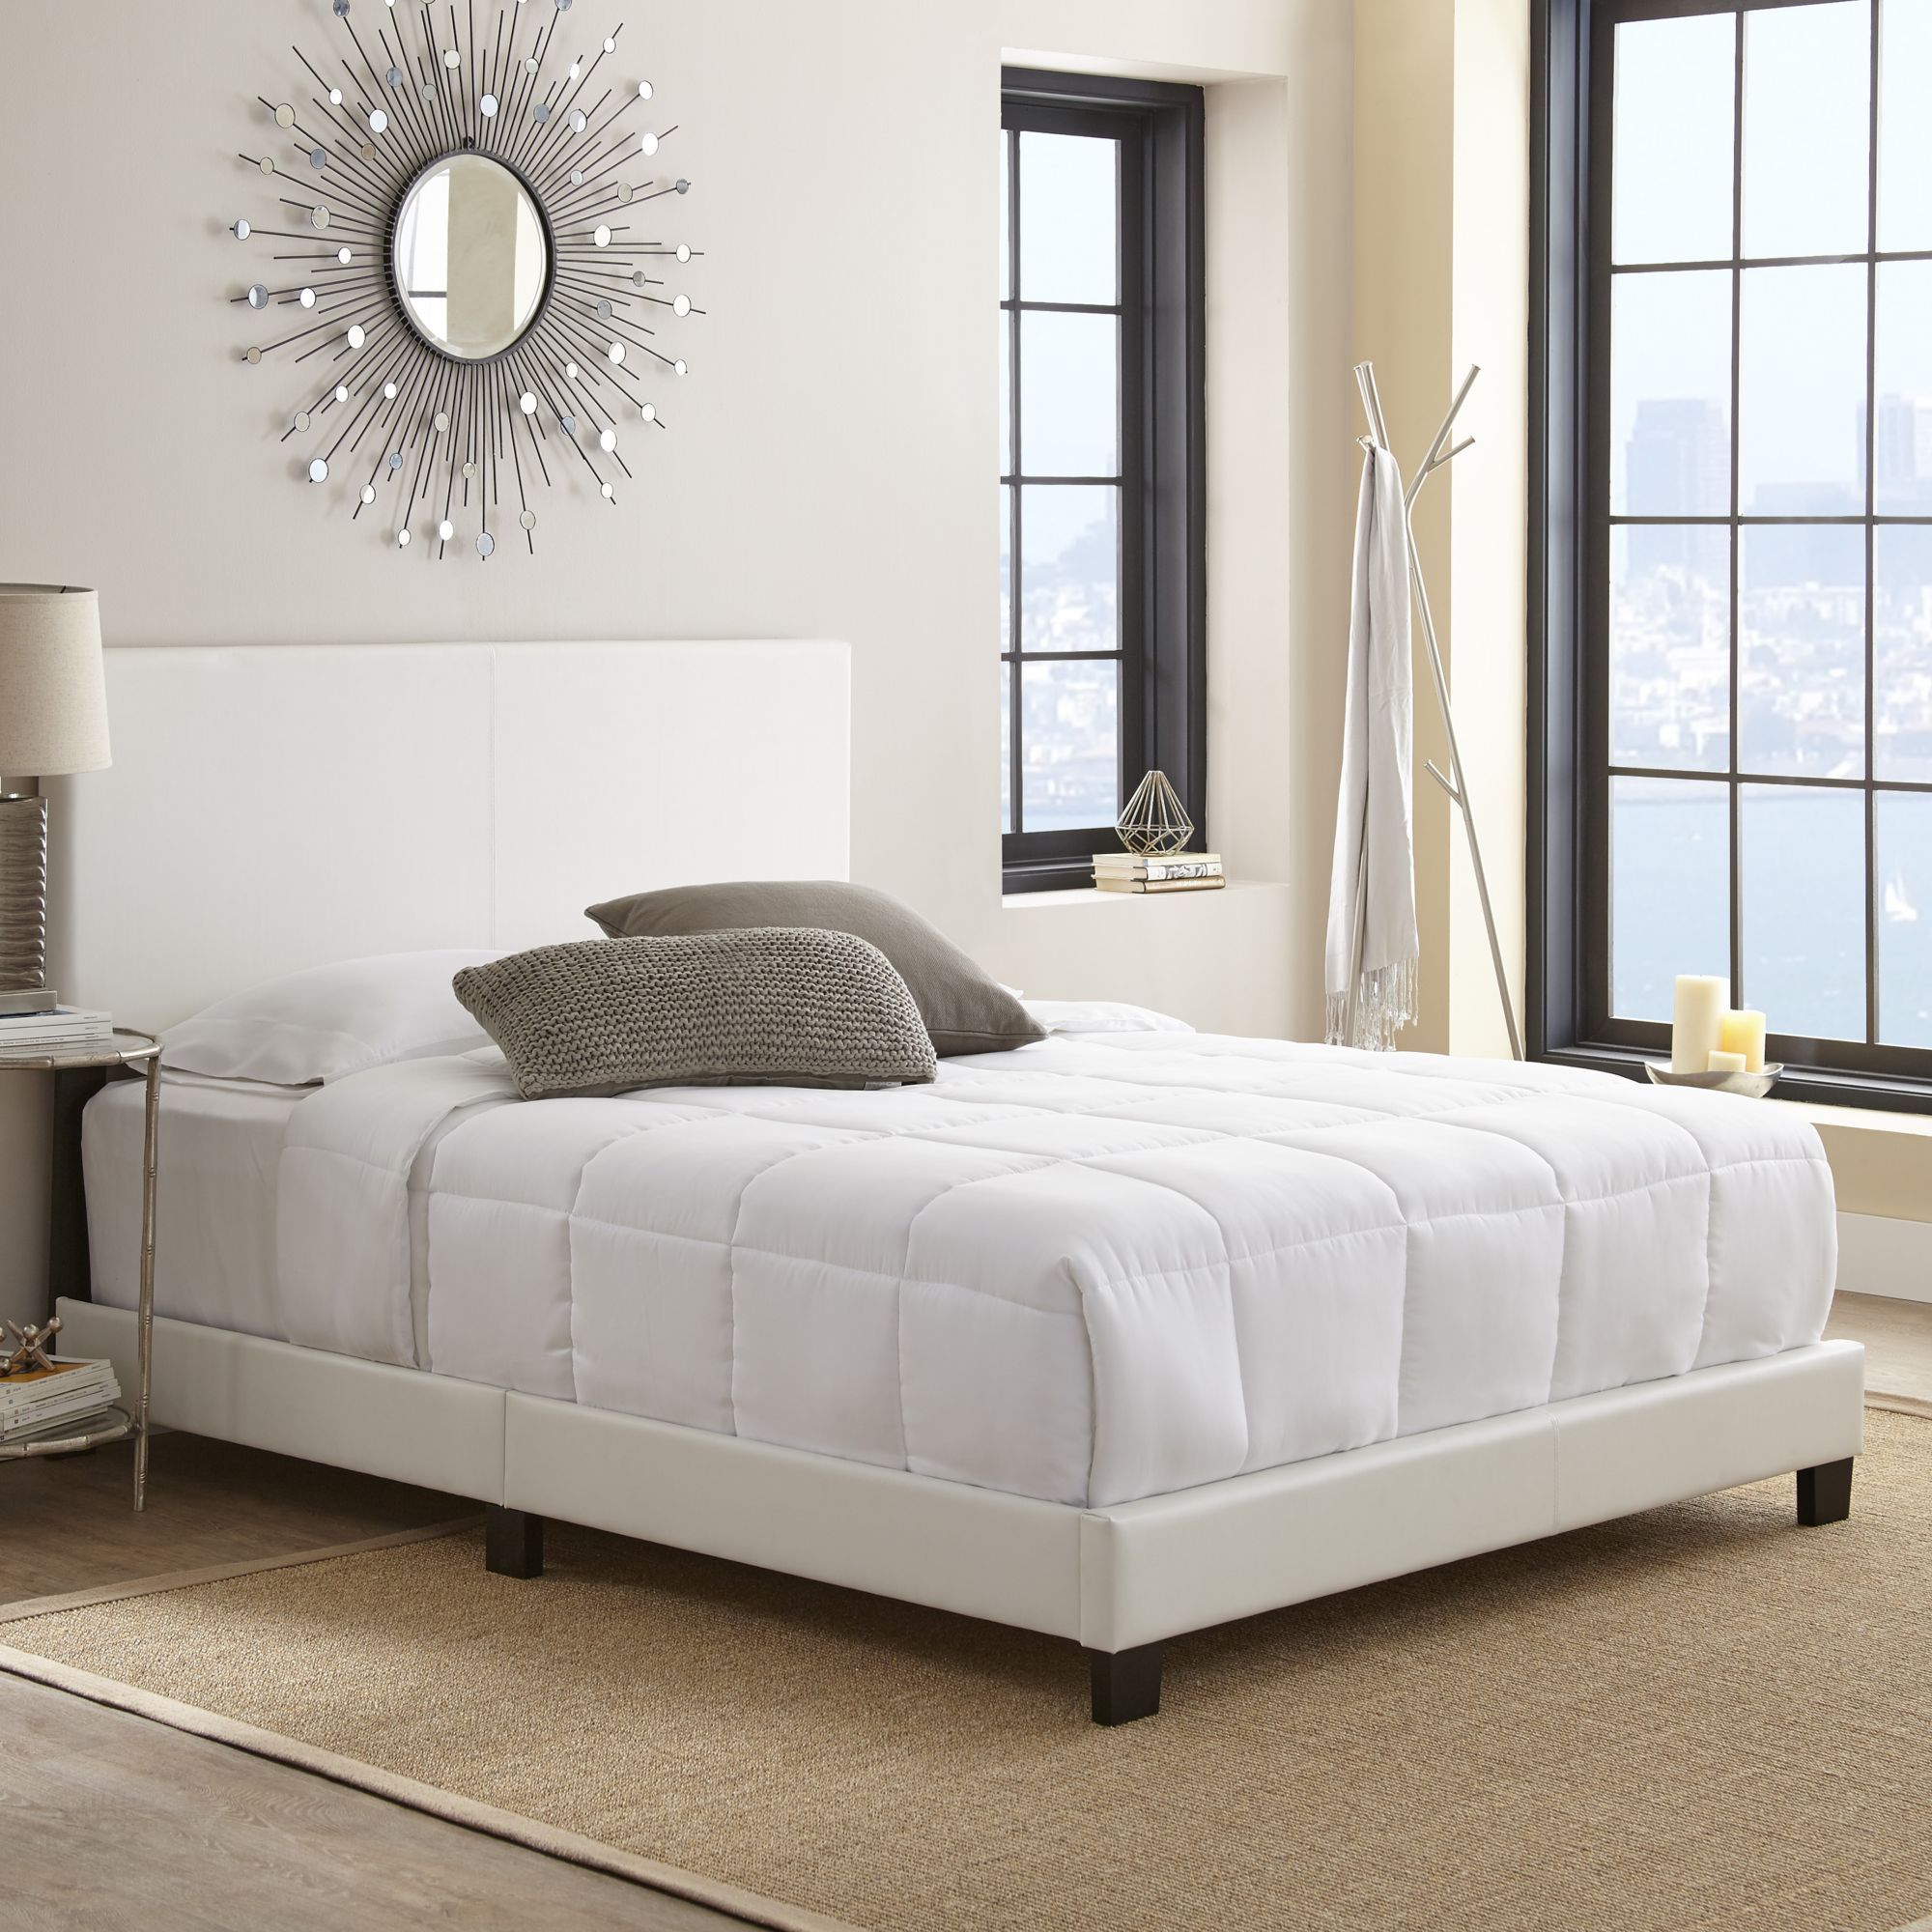 Contour Rest Garnet Queen Size Simulated Leather Platform Bed Frame - White